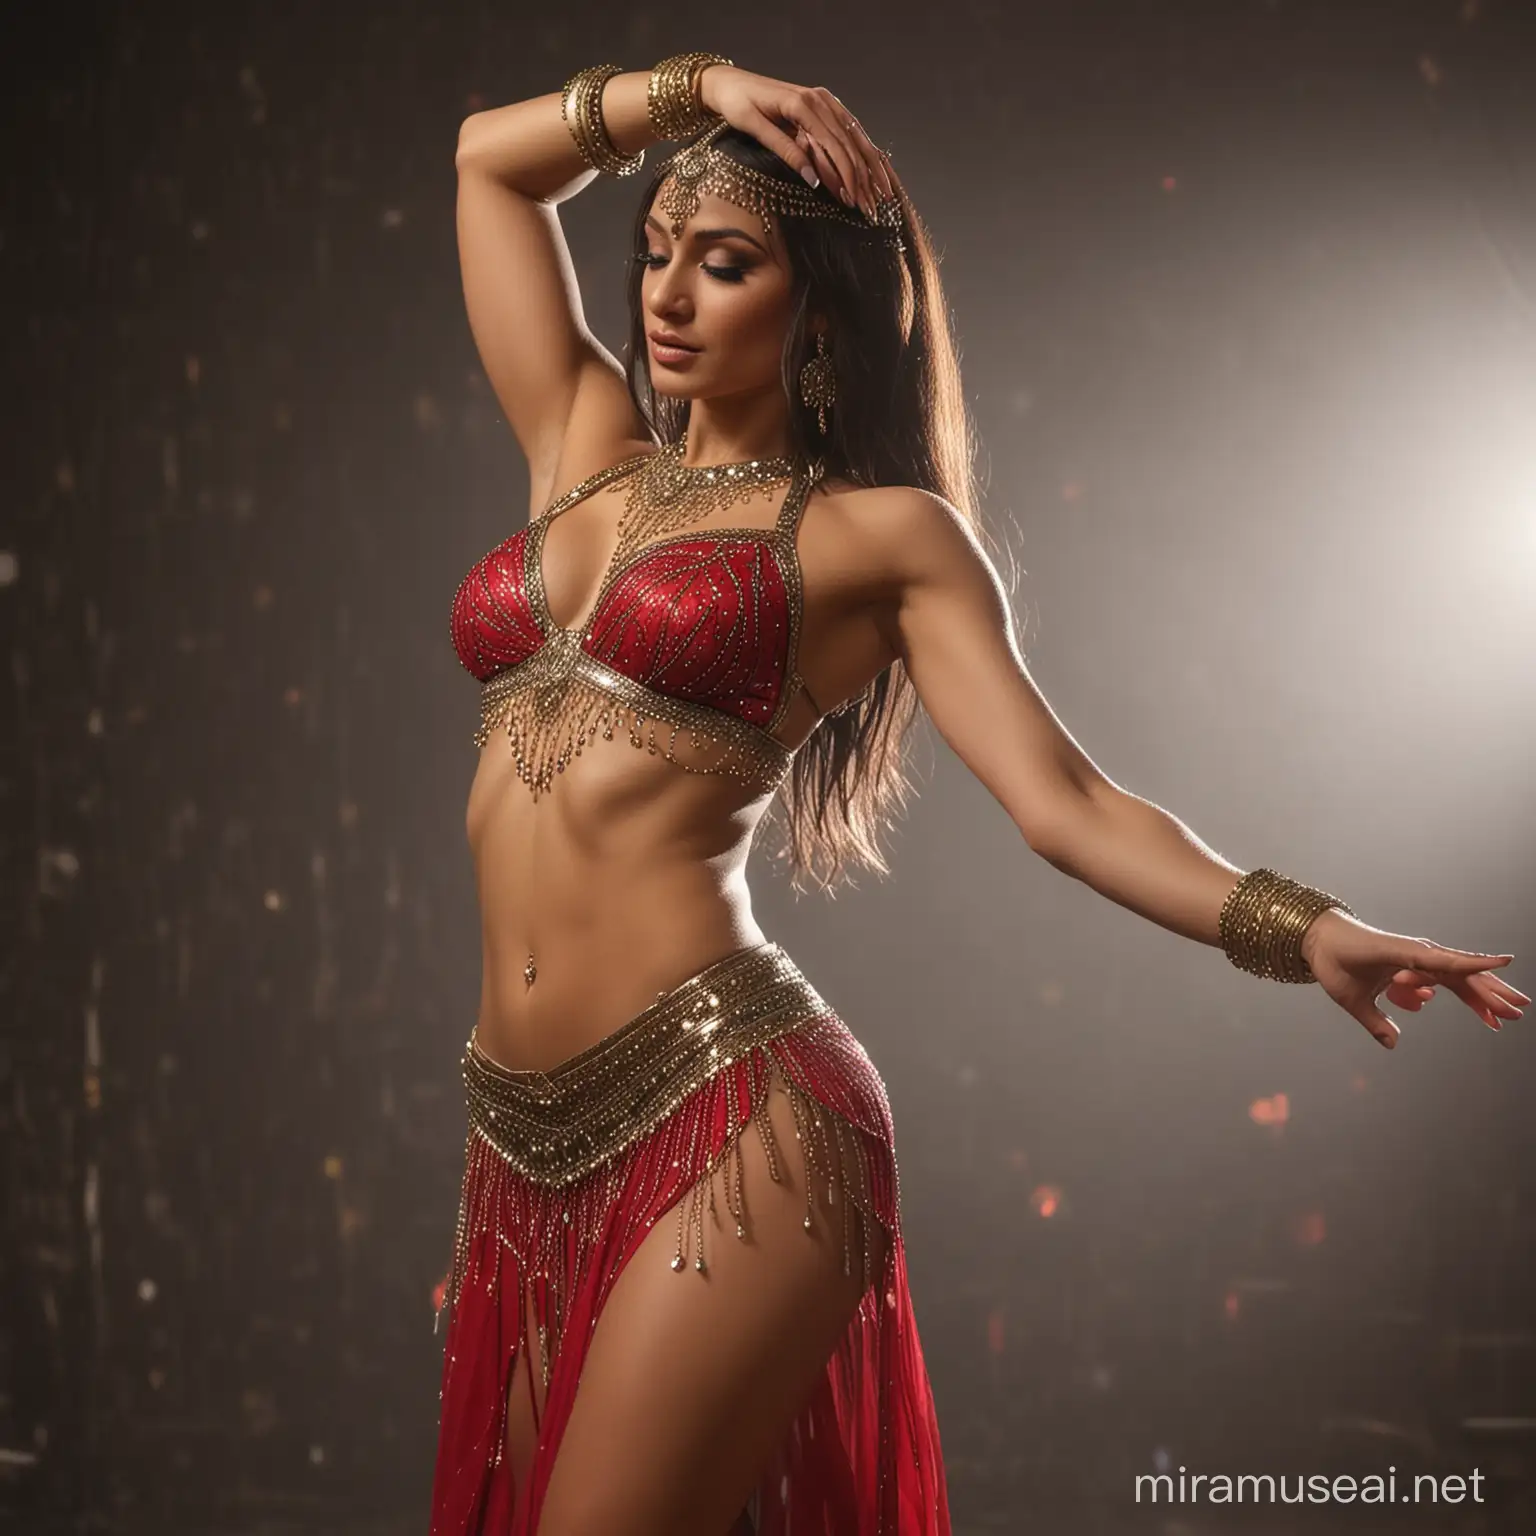 A sexy seductive belly dancer back pose with masterful control over her movements, perfect finger shape her toned pecs glistening in the stage lights as she brings the audience to their feet.